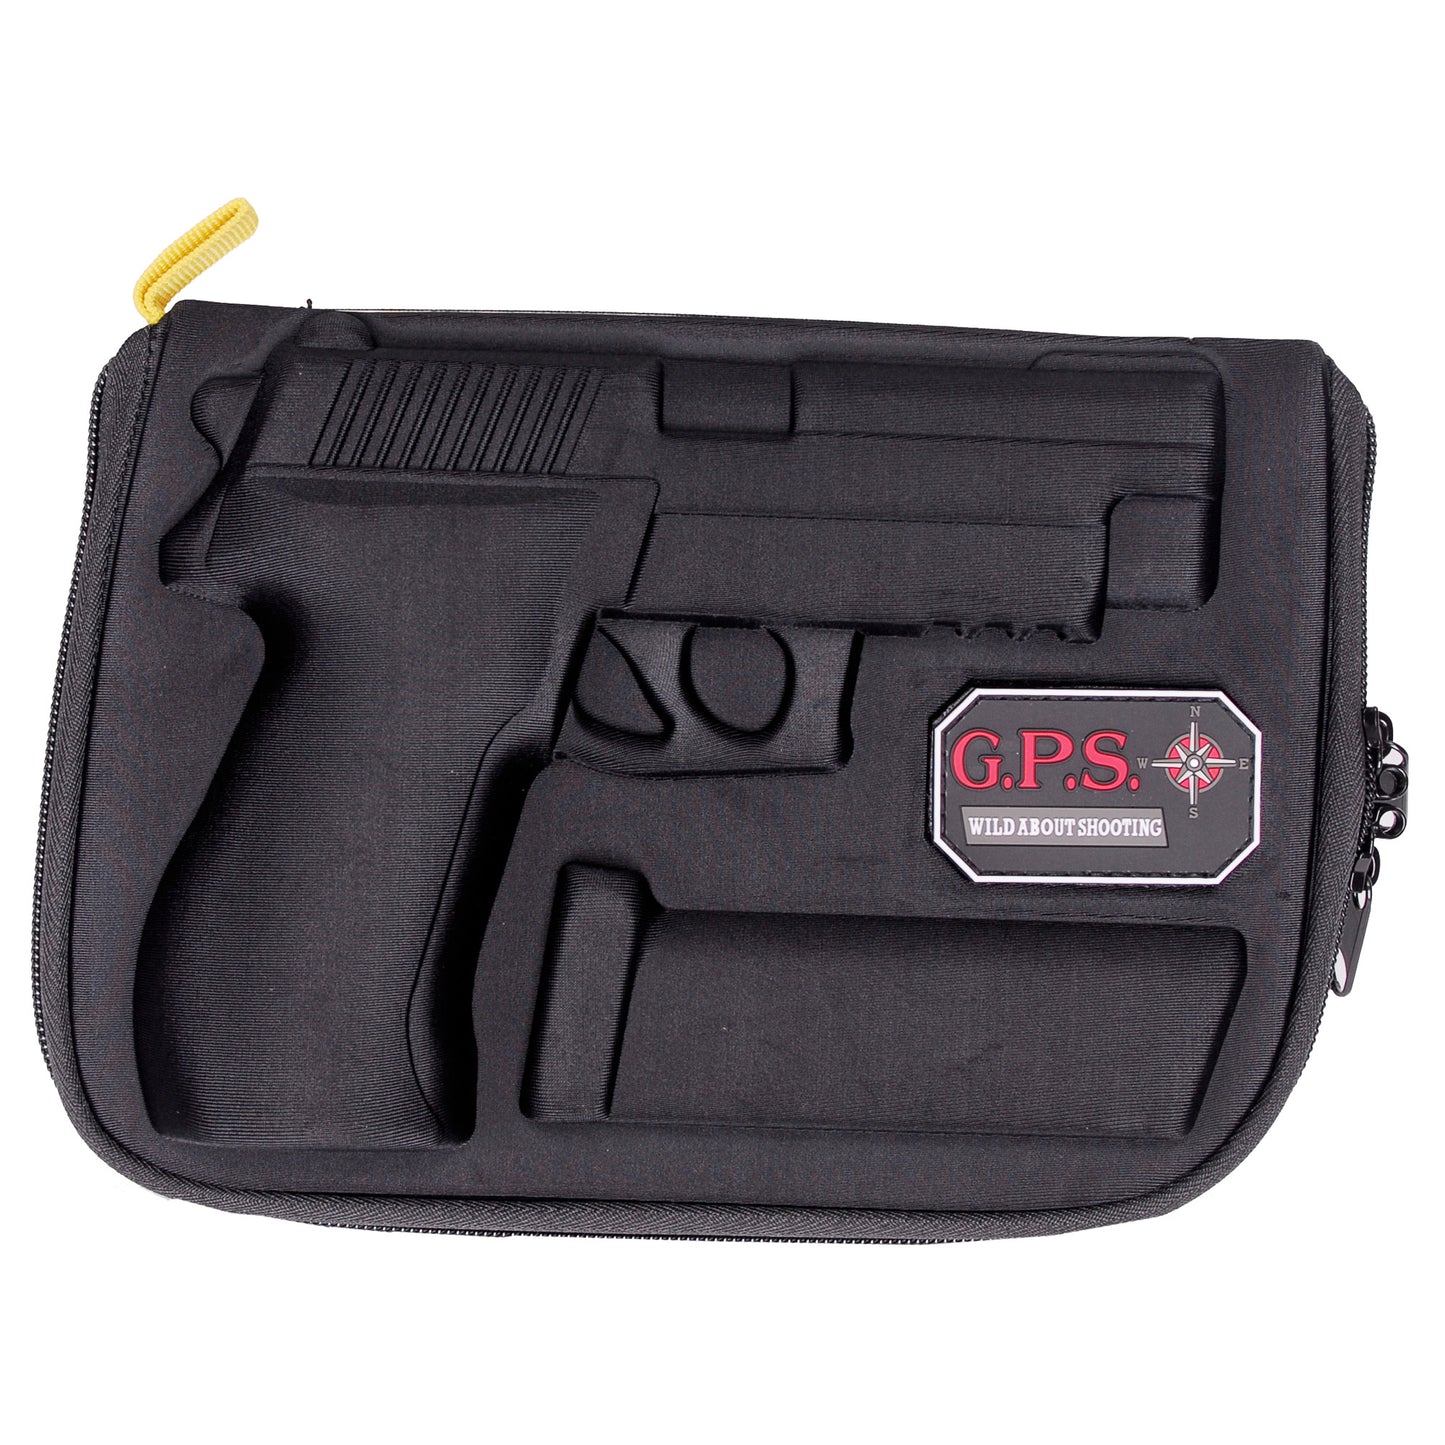 GPS Molded Pistol Case Black Soft For SIG P226/P938 GPS-910PC - California Shooting Supplies